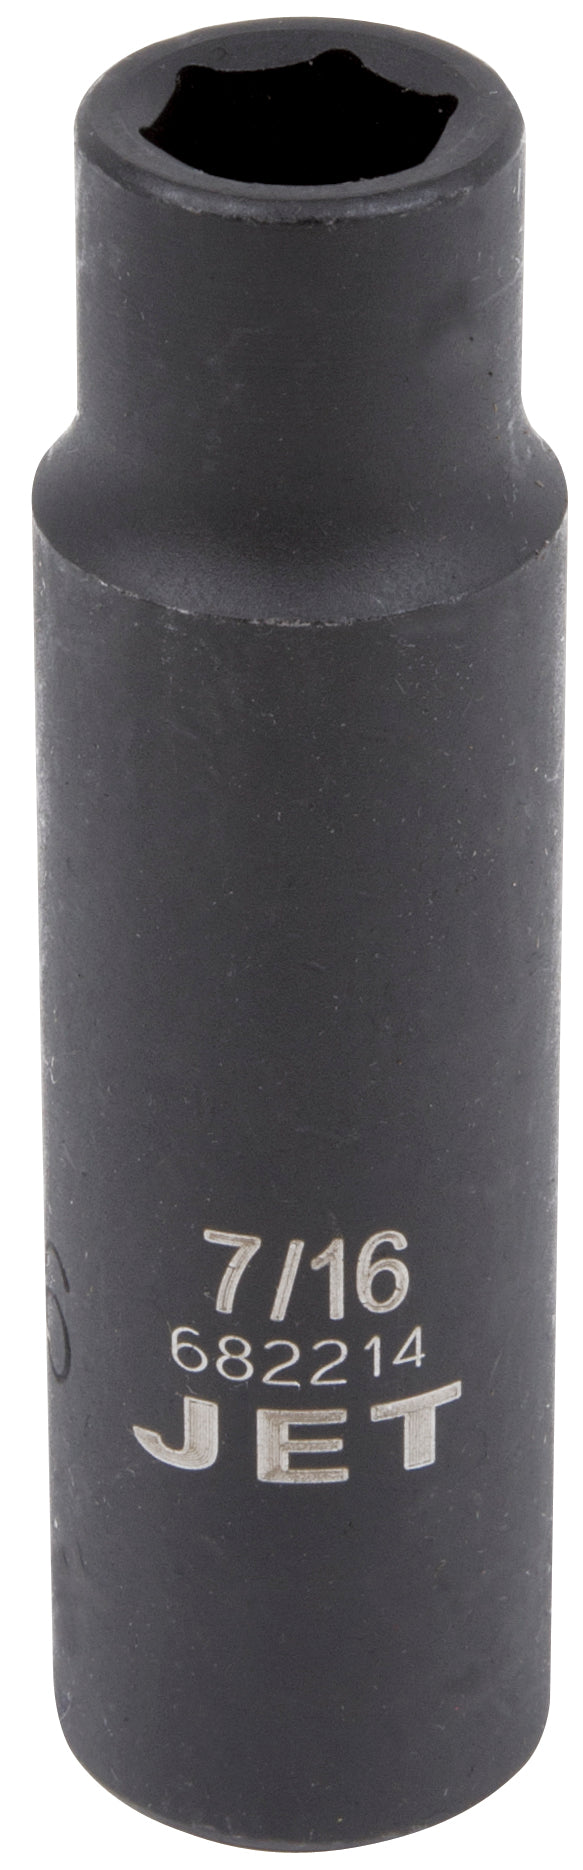 Jet 682214 - 1/2 Inch Dr X 7/16 Inch Deep Impact Socket 6 Point